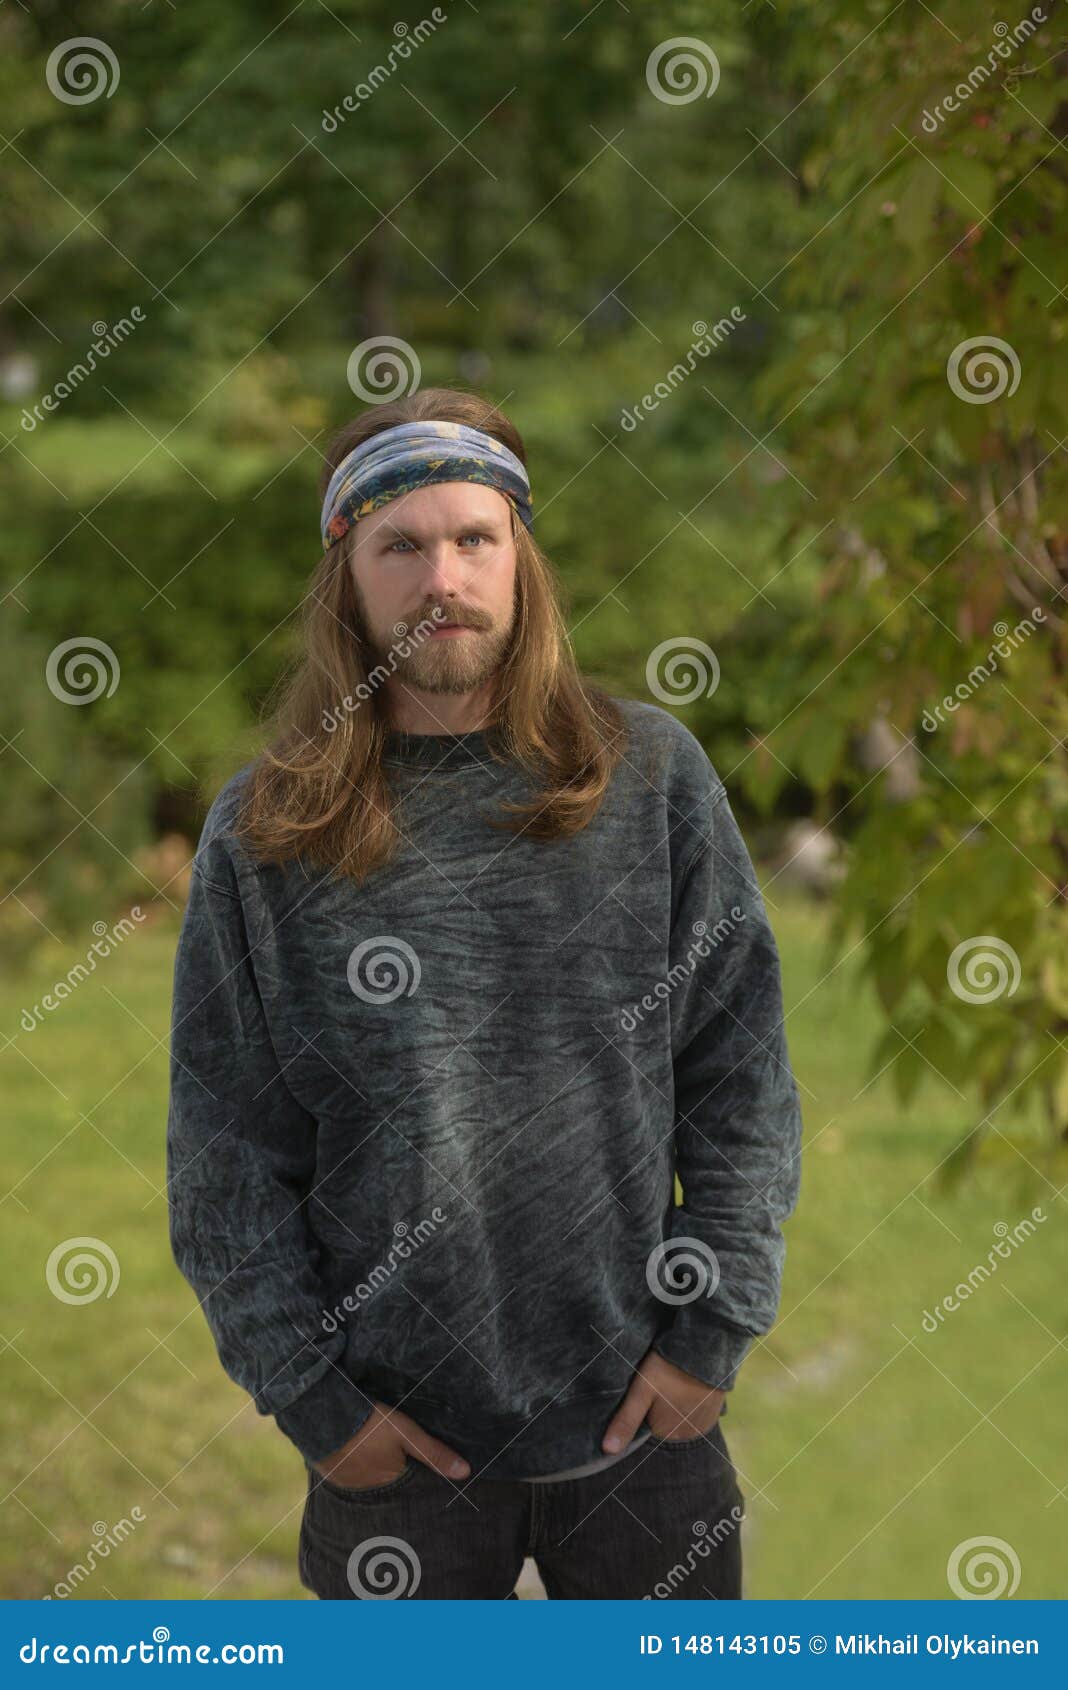 Profile a Young Man with Long Hair and Beard a Bandana Stock Image - of long, hippie: 148143105